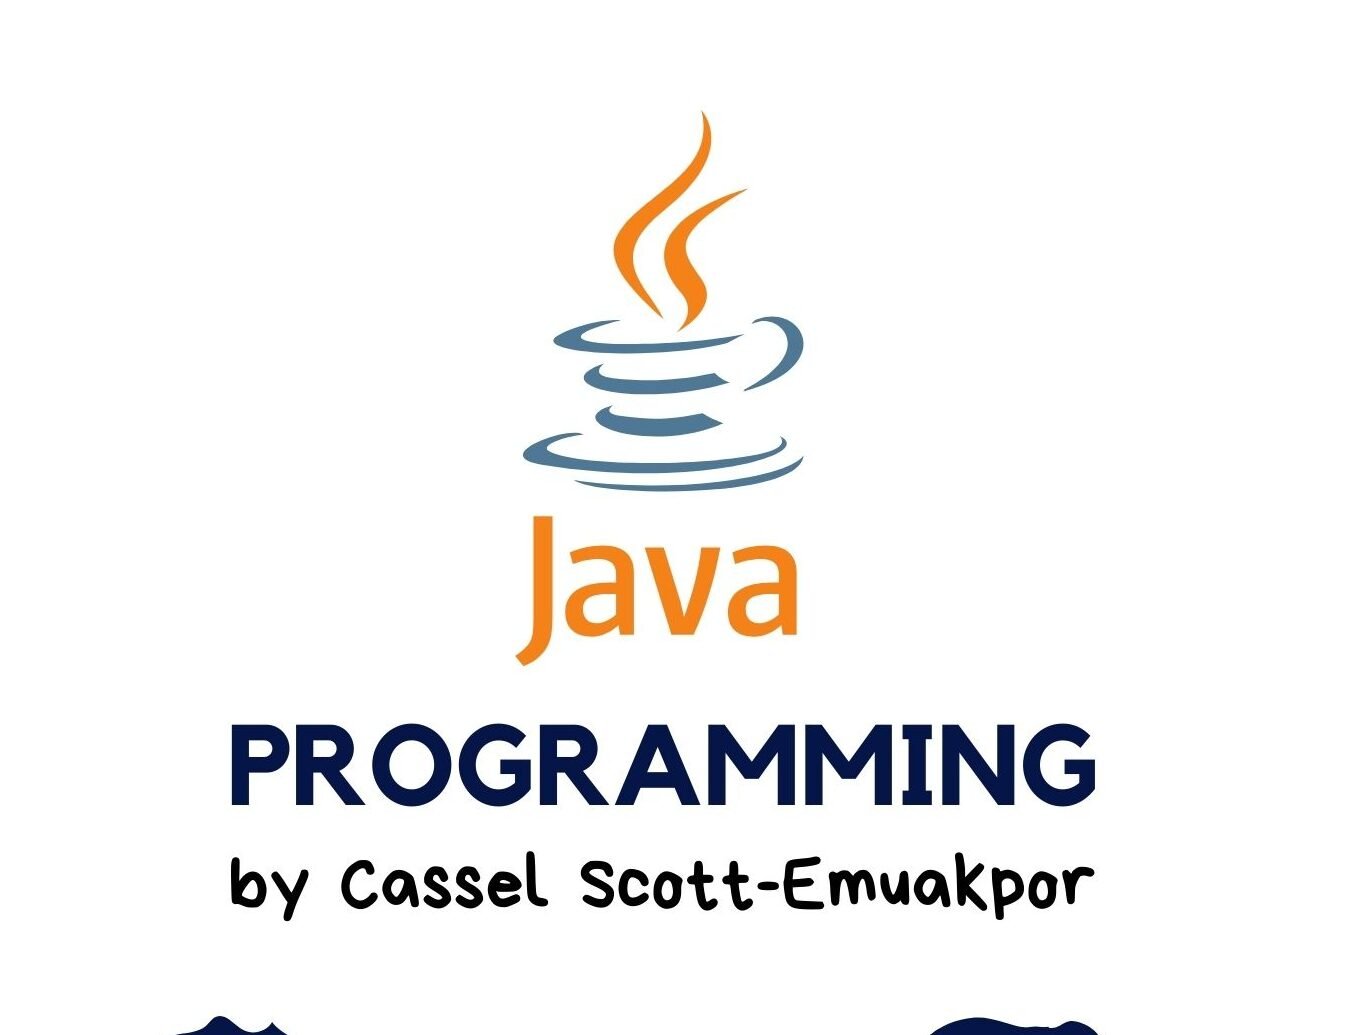 Mastering Java: From Basics to Advanced Techniques